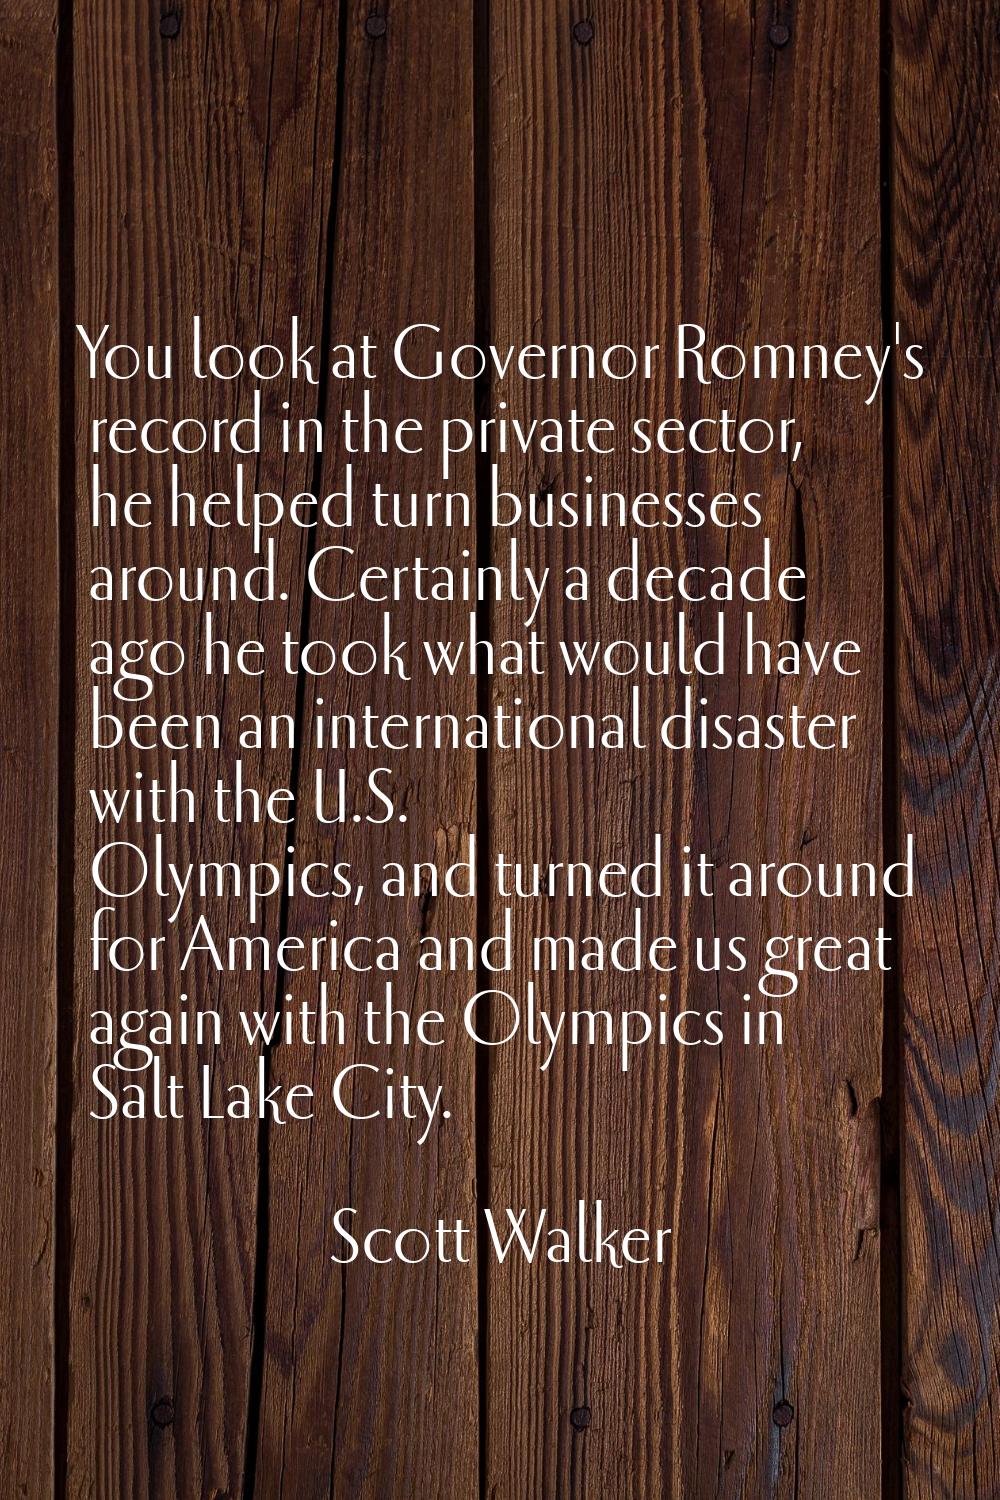 You look at Governor Romney's record in the private sector, he helped turn businesses around. Certa